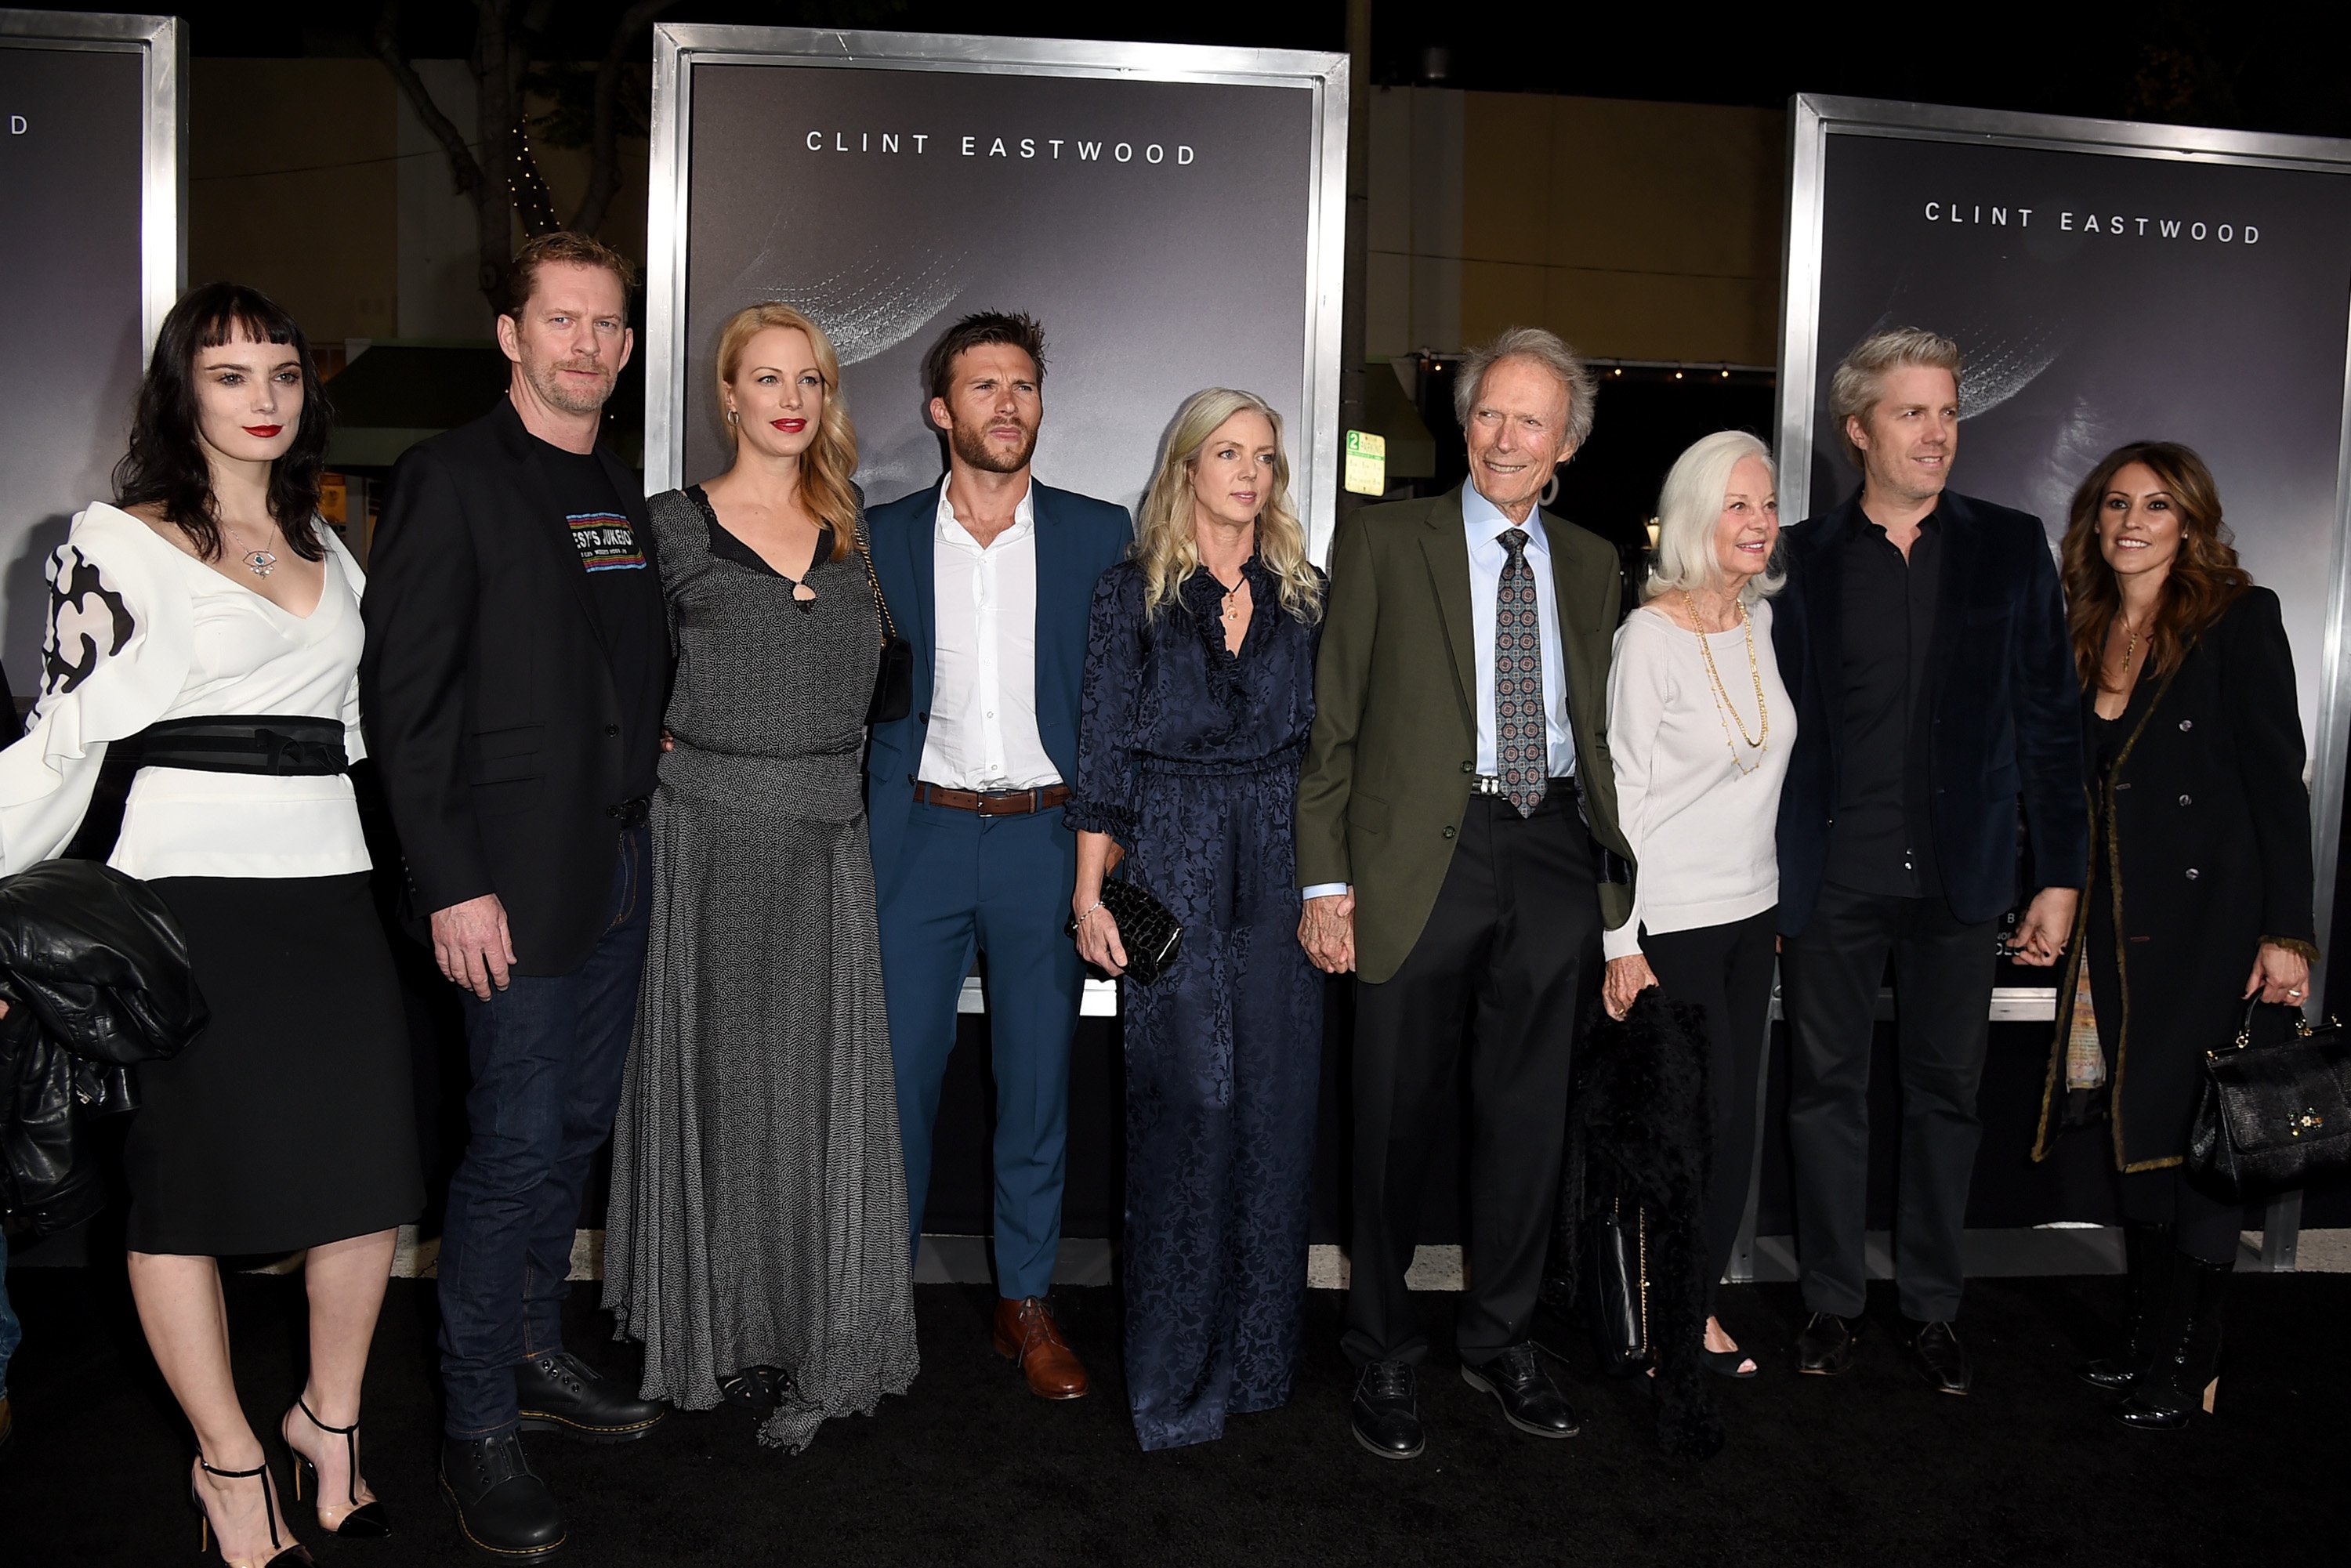 Clint Eastwood with his family: (from L-R) Graylen Eastwood, Stacy Poitras, Alison Eastwood, Scott Eastwood, Christina Sandera, Maggie Johnson, Kyle Eastwood, and Cynthia Ramirez in Los Angeles in 2018. | Source: Getty Images 